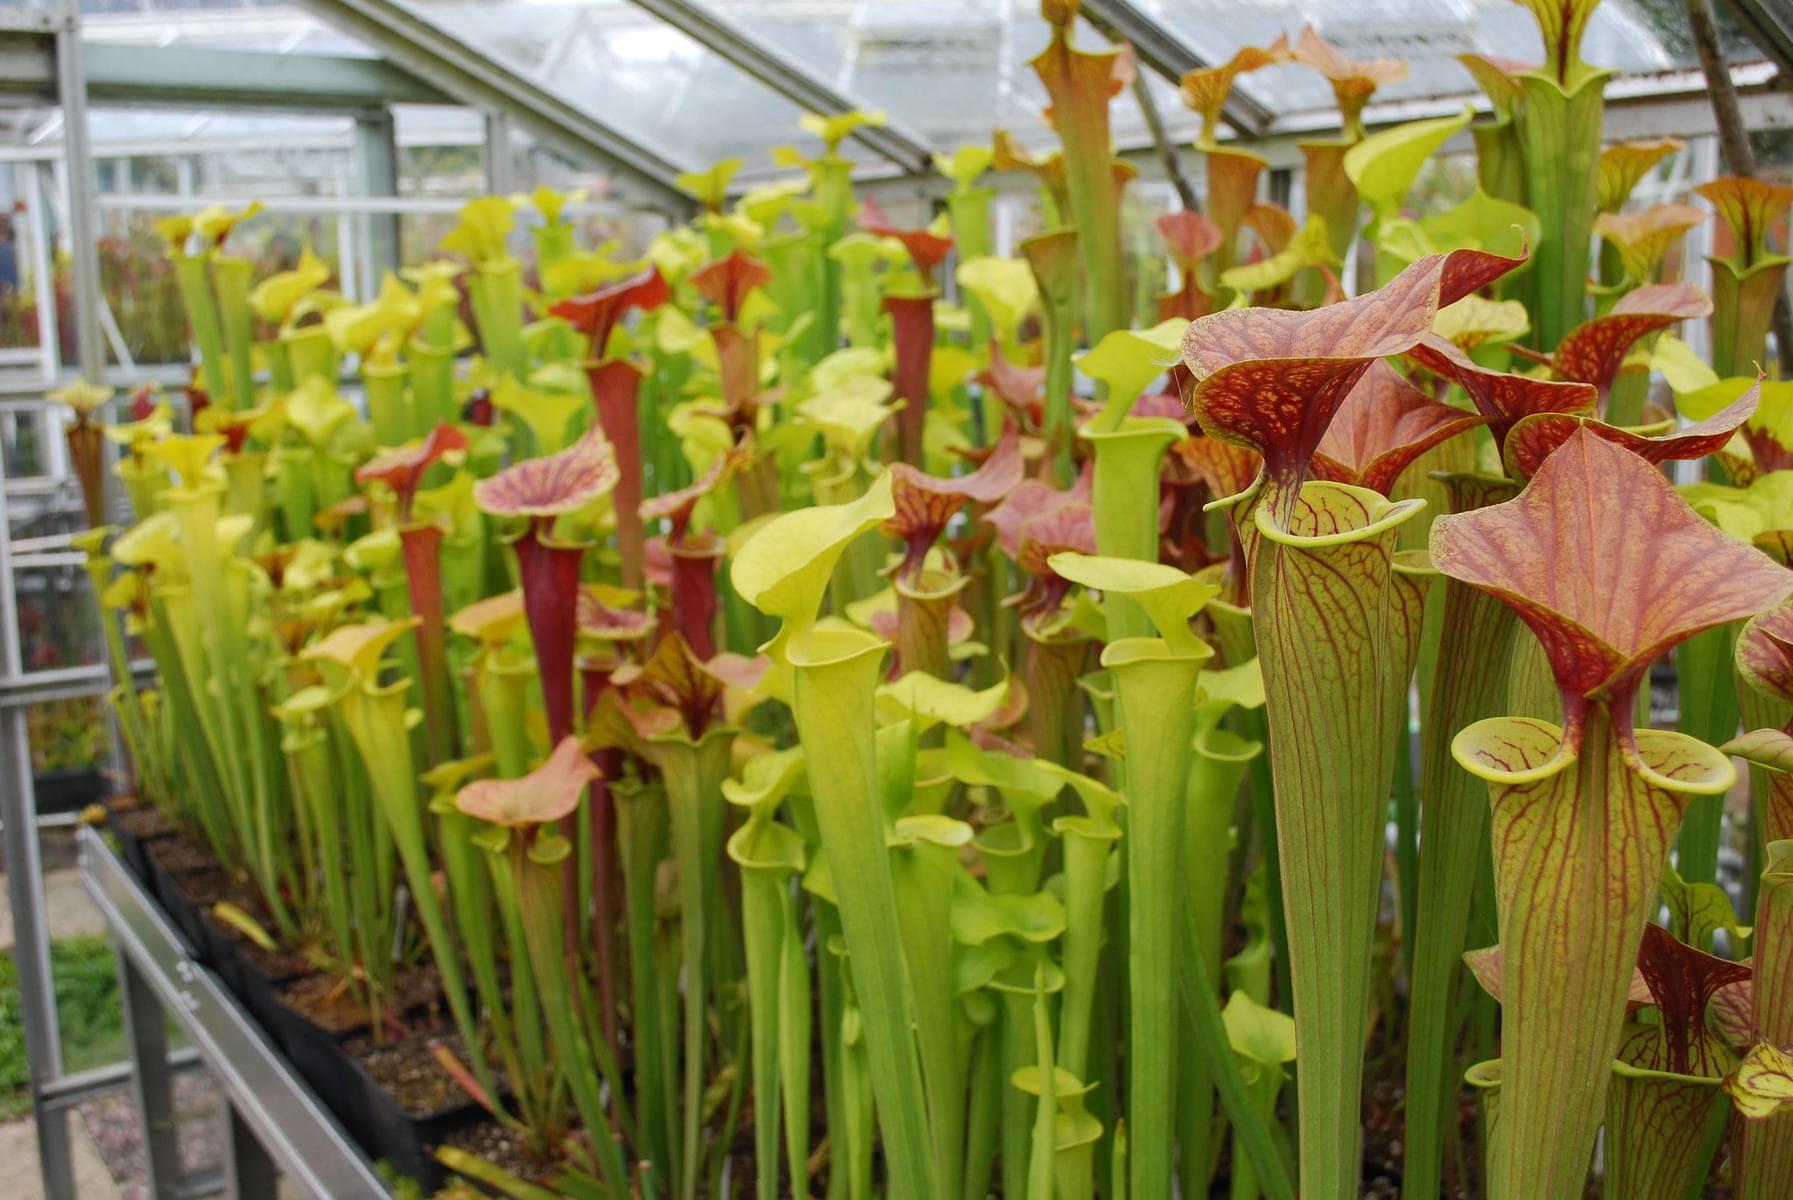 Carnivorous plant collection